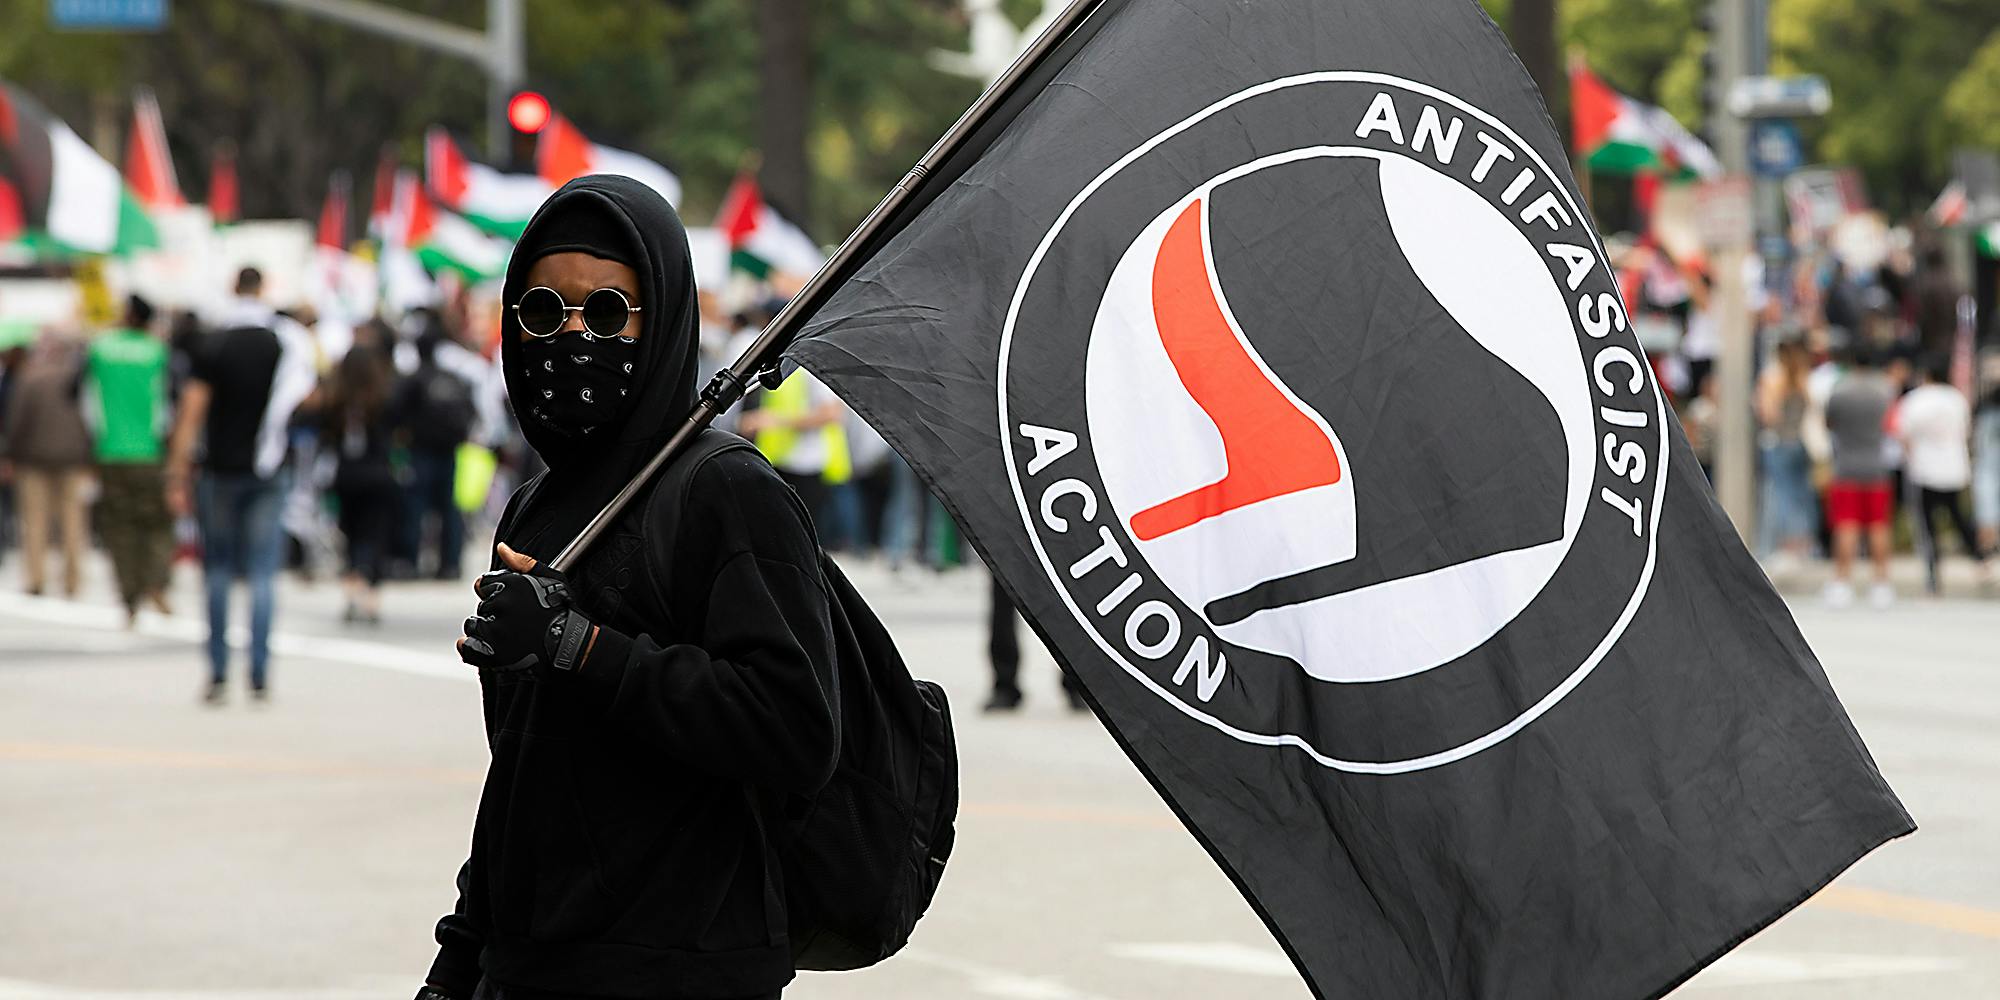 A man wearing a mask and carrying a flag.